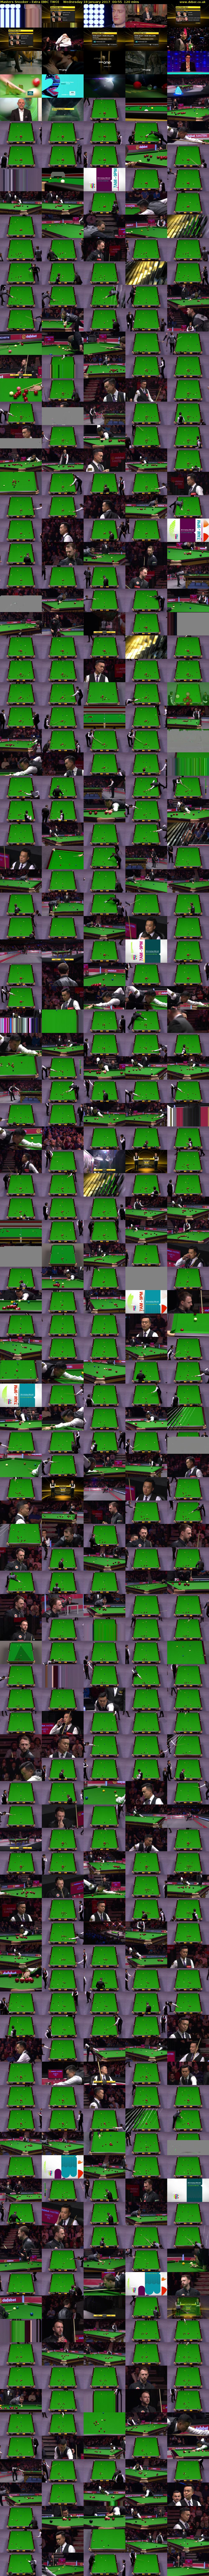 Masters Snooker - Extra (BBC TWO) Wednesday 18 January 2017 00:55 - 02:55